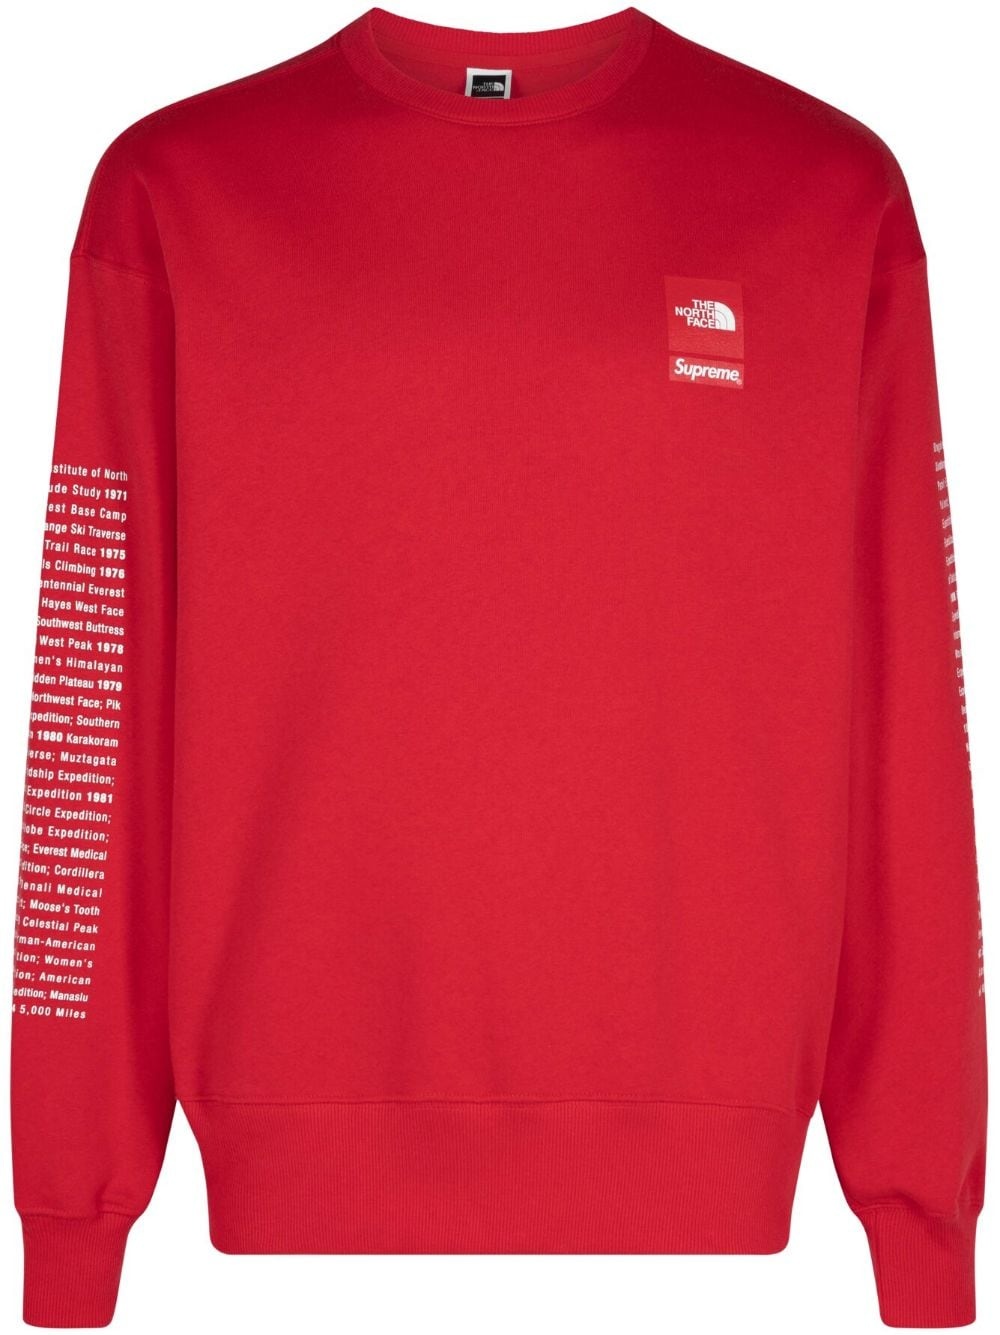 x The North Face "Red" sweatshirt - 1